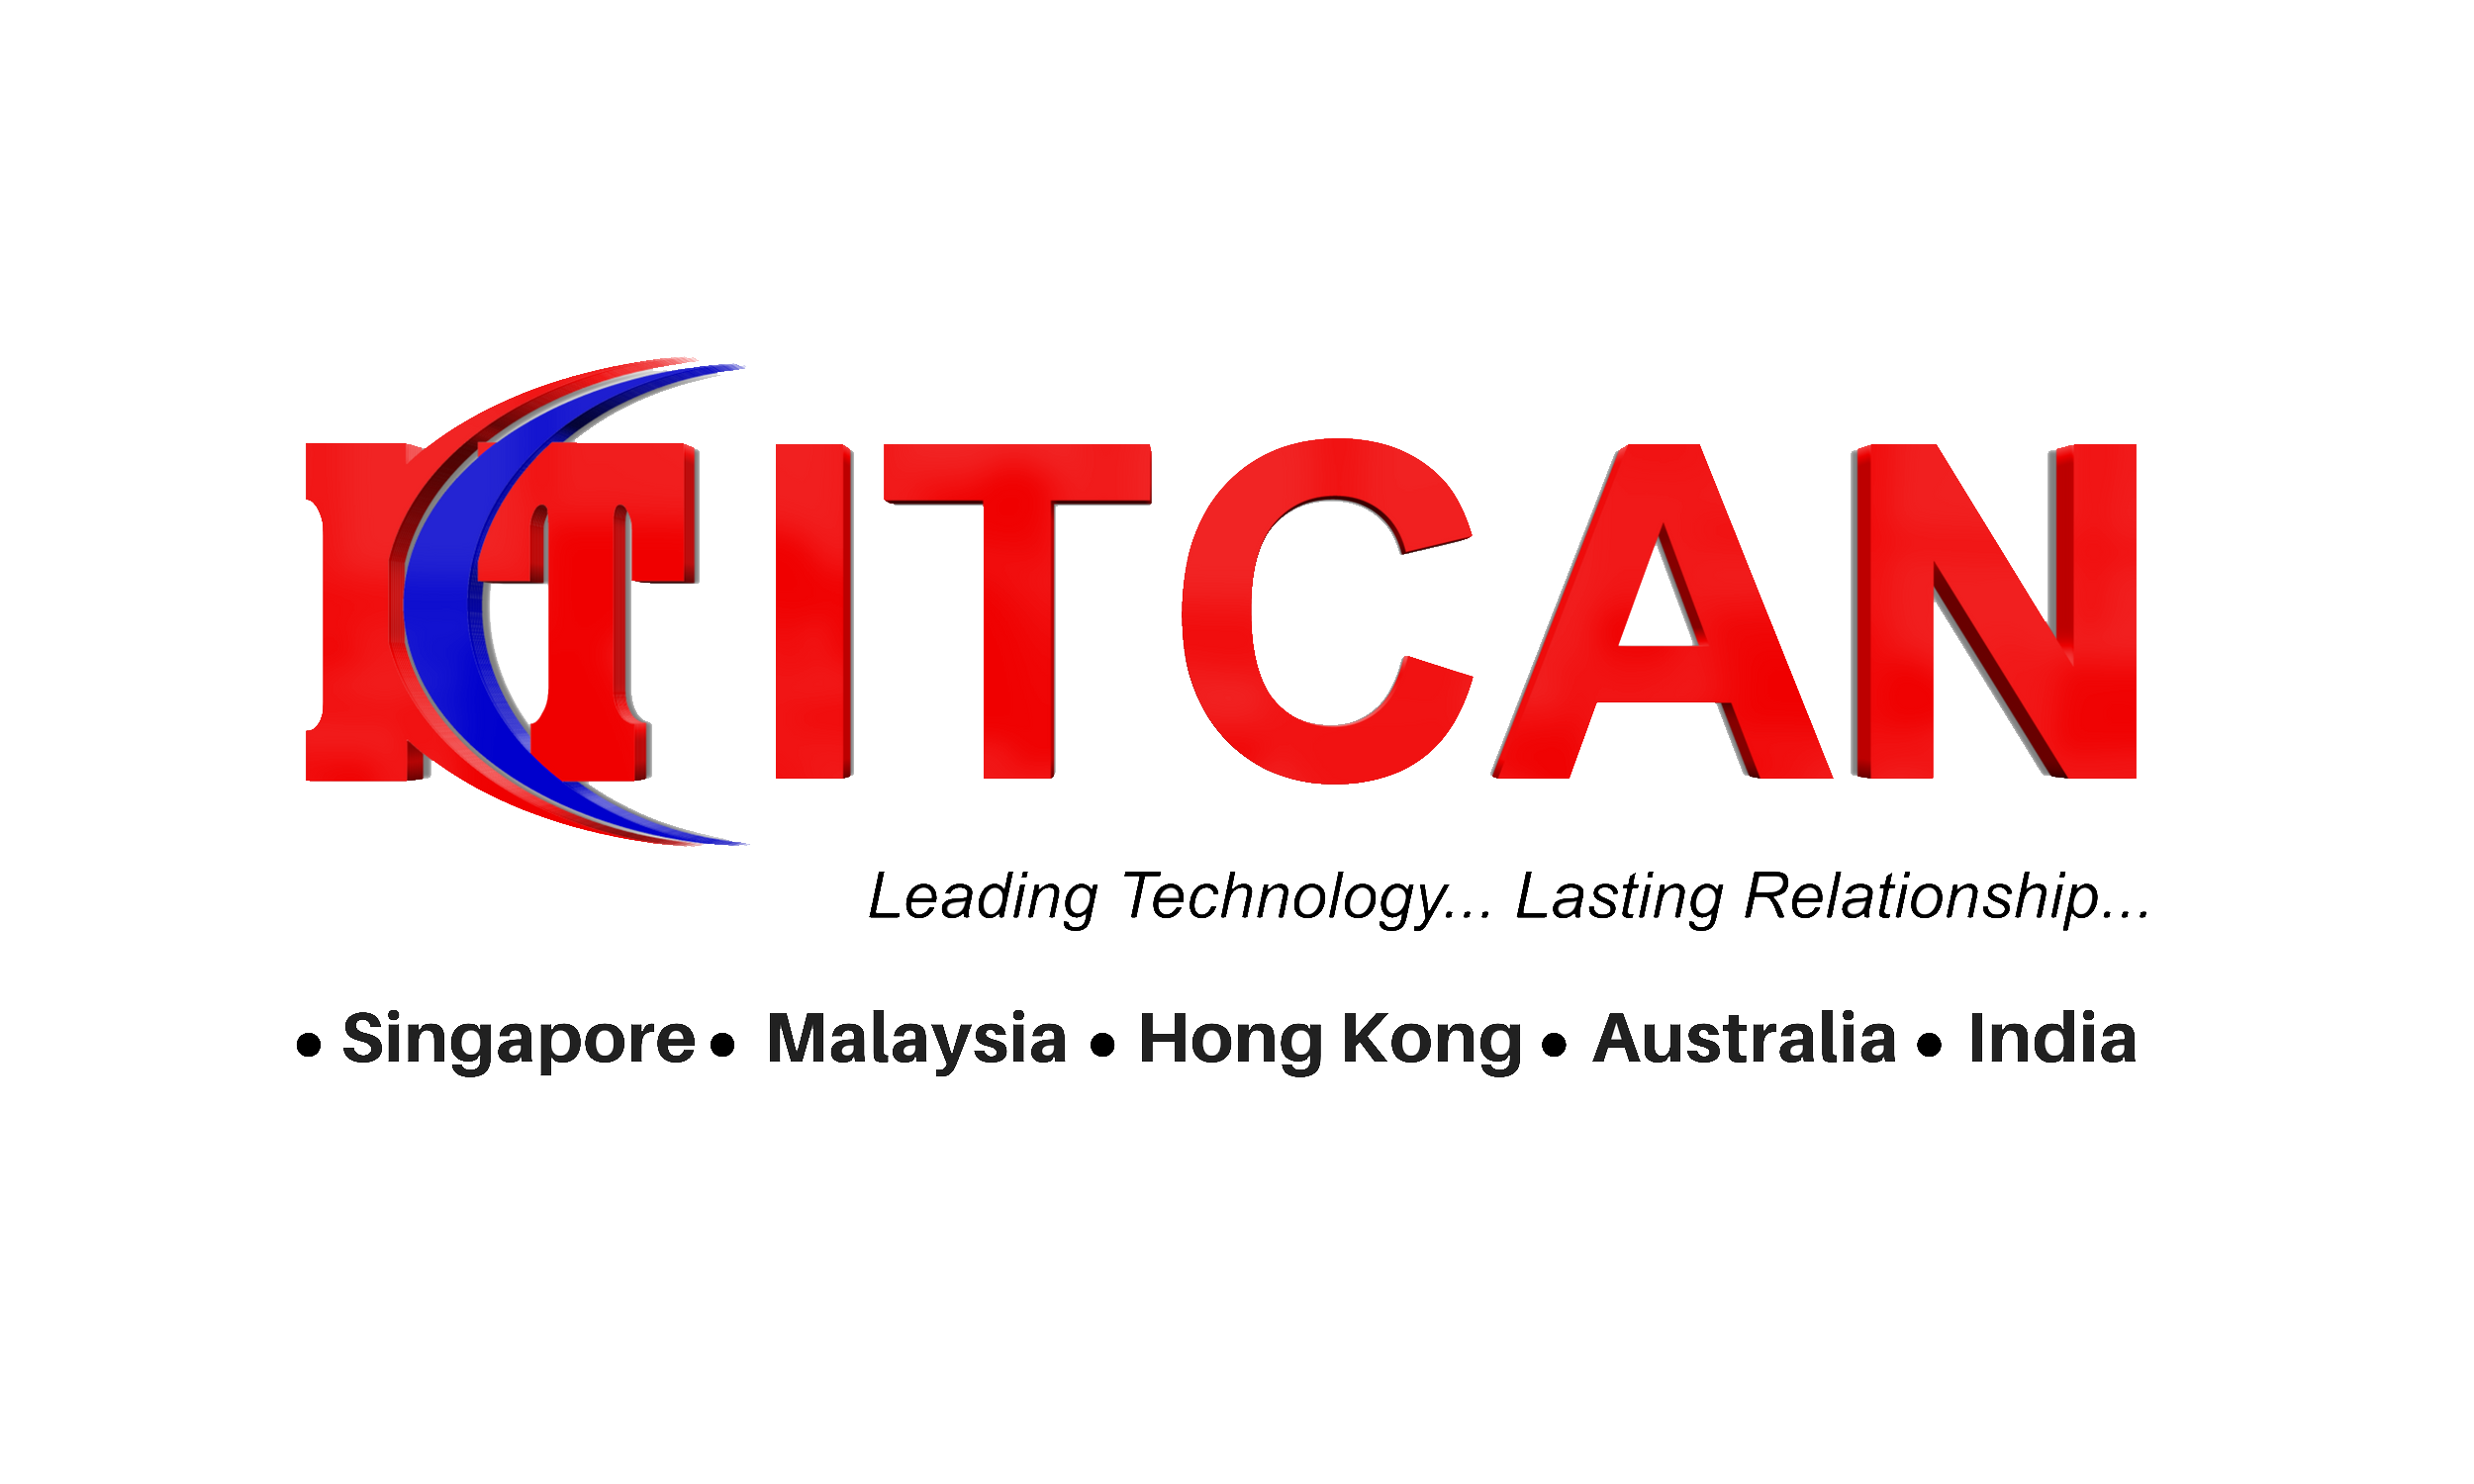 ITCAN